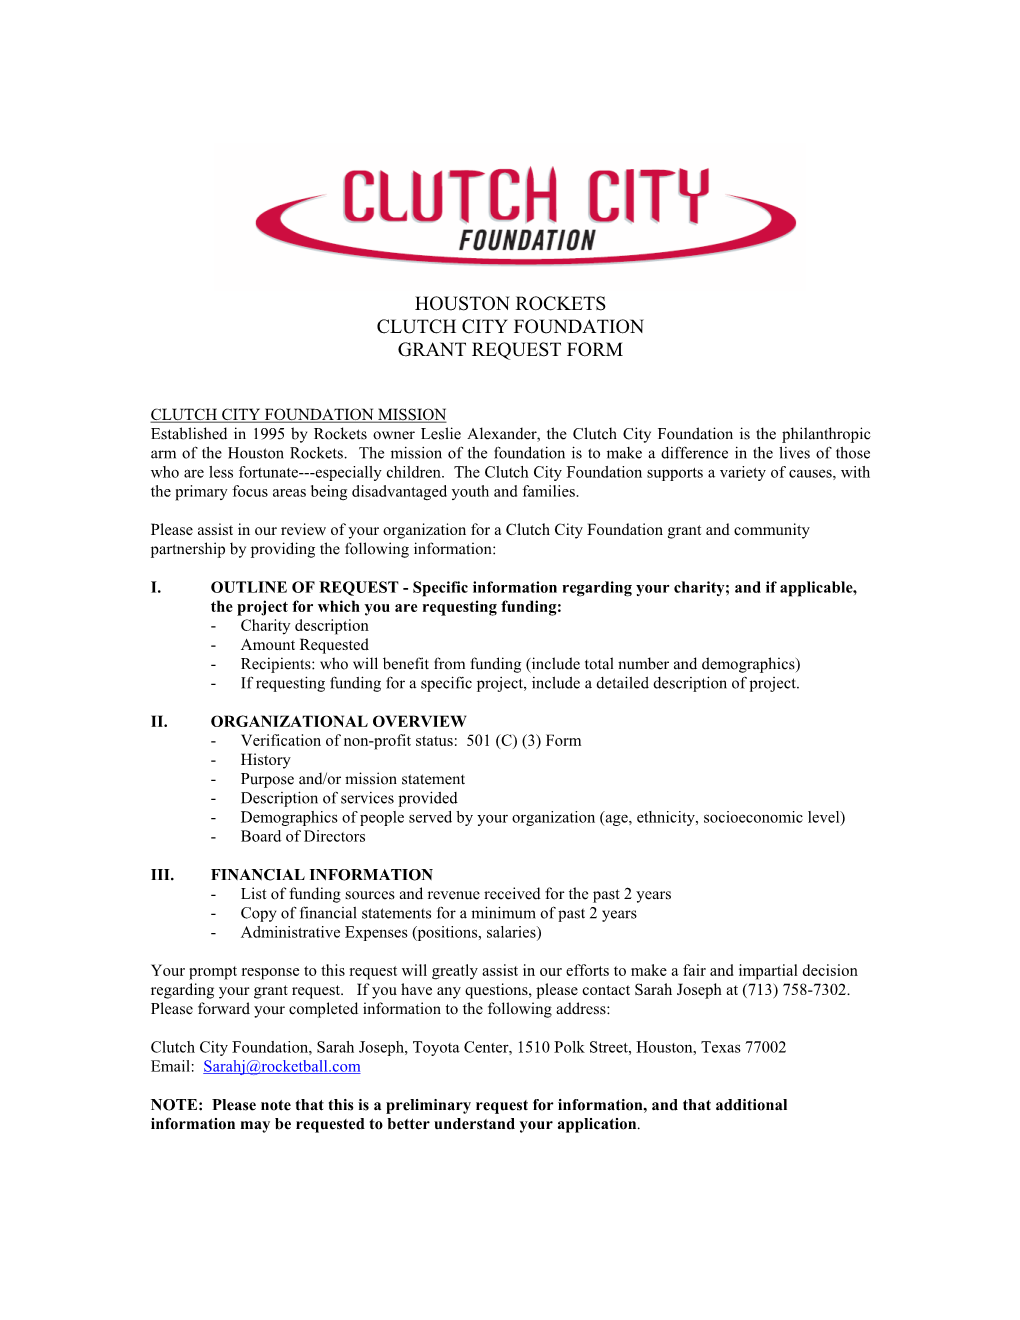 Houston Rockets Clutch City Foundation Grant Request Form